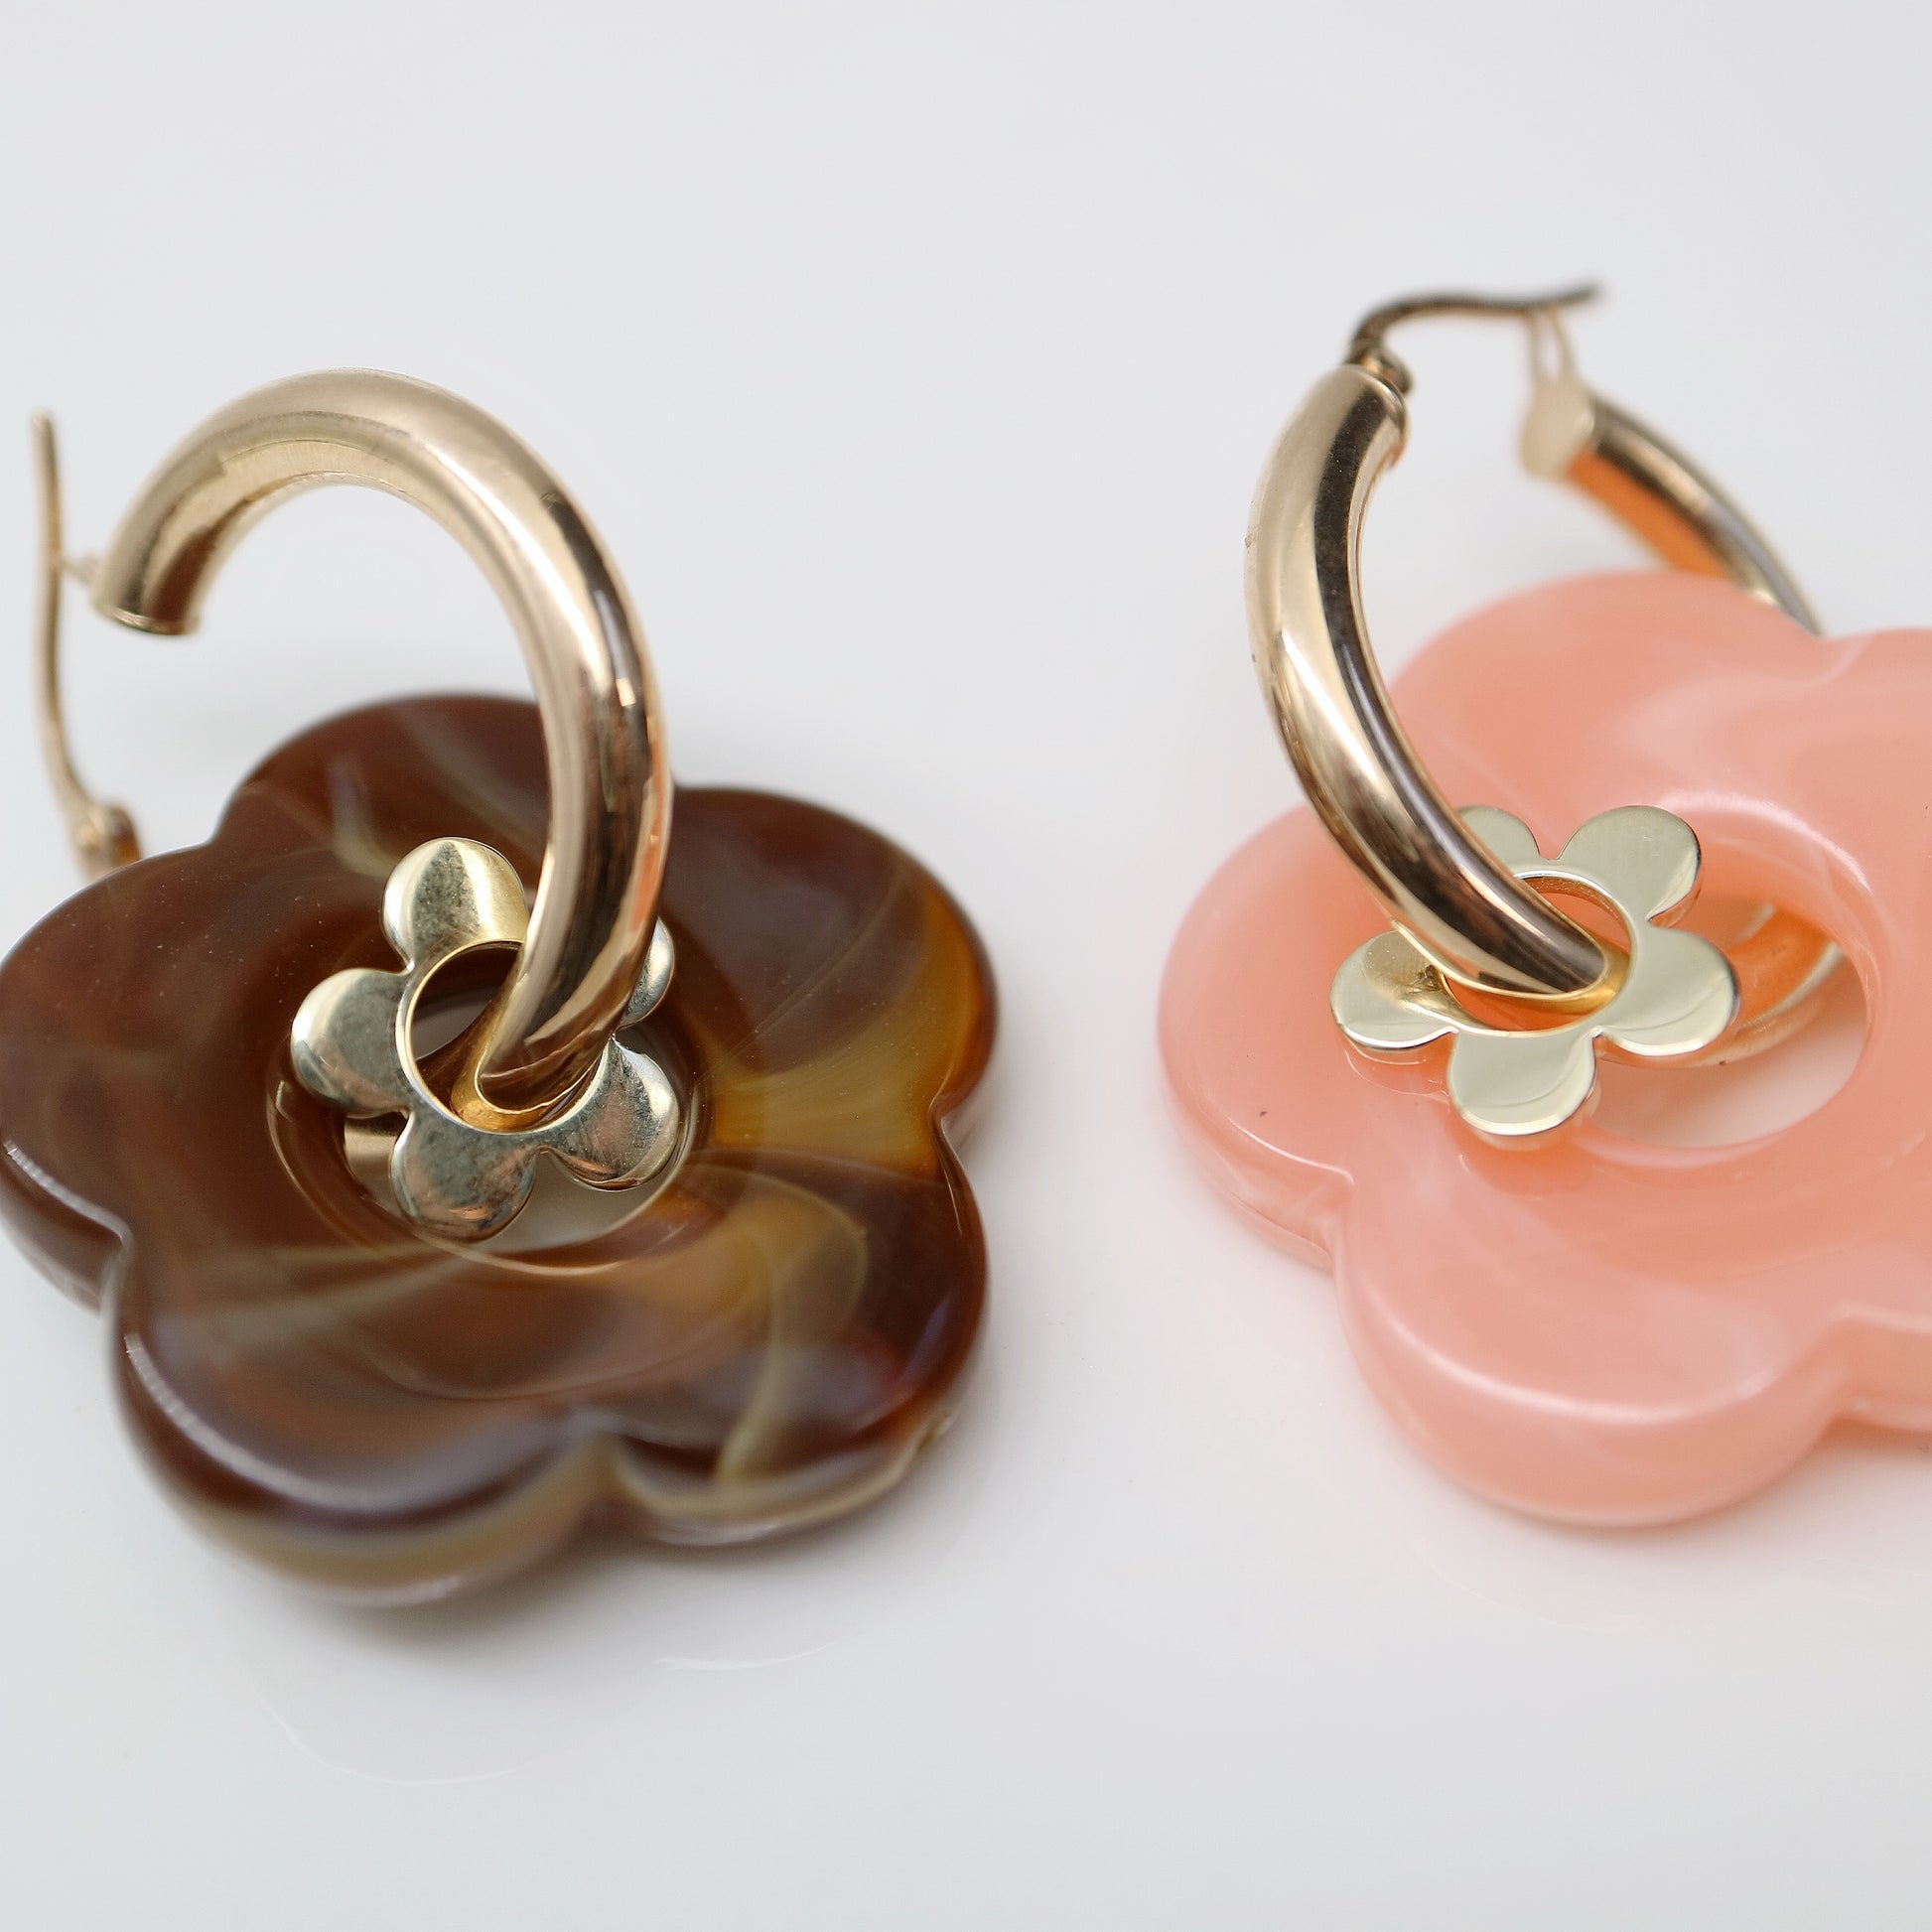 Flower Power Acrylic Charms on 9kt yellow gold hoop earrings